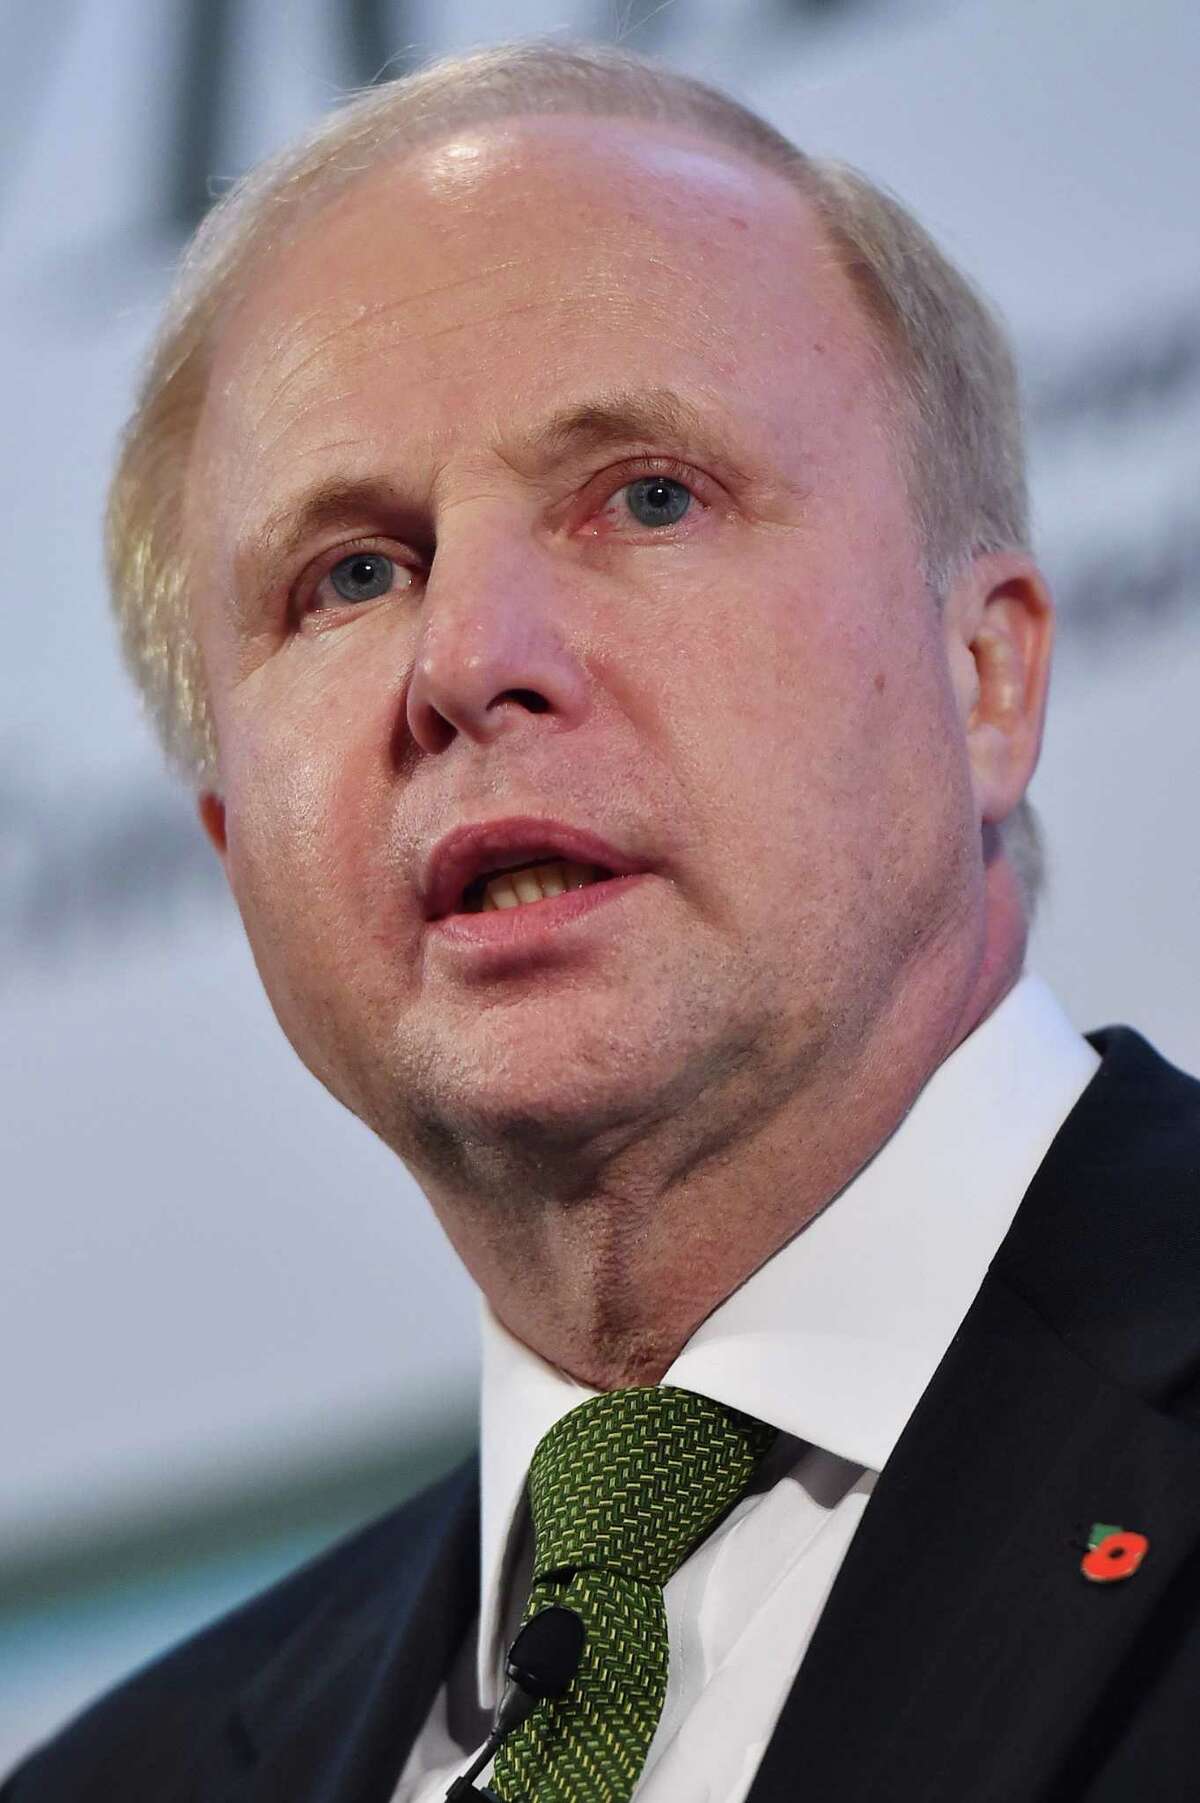 (FILES) This file photo taken on October 29, 2014 shows BP Group Chief Executive Bob Dudley during the Oil and Money conference in central London, on October 29, 2014. Shareholders in BP April 14 rejected a pay deal worth 19.6 million USD (17.3 million euros, 13.8 million GBP) for chief executive Bob Dudley amid heavy losses and job cuts at the oil giant. / AFP PHOTO / BEN STANSALLBEN STANSALL/AFP/Getty Images